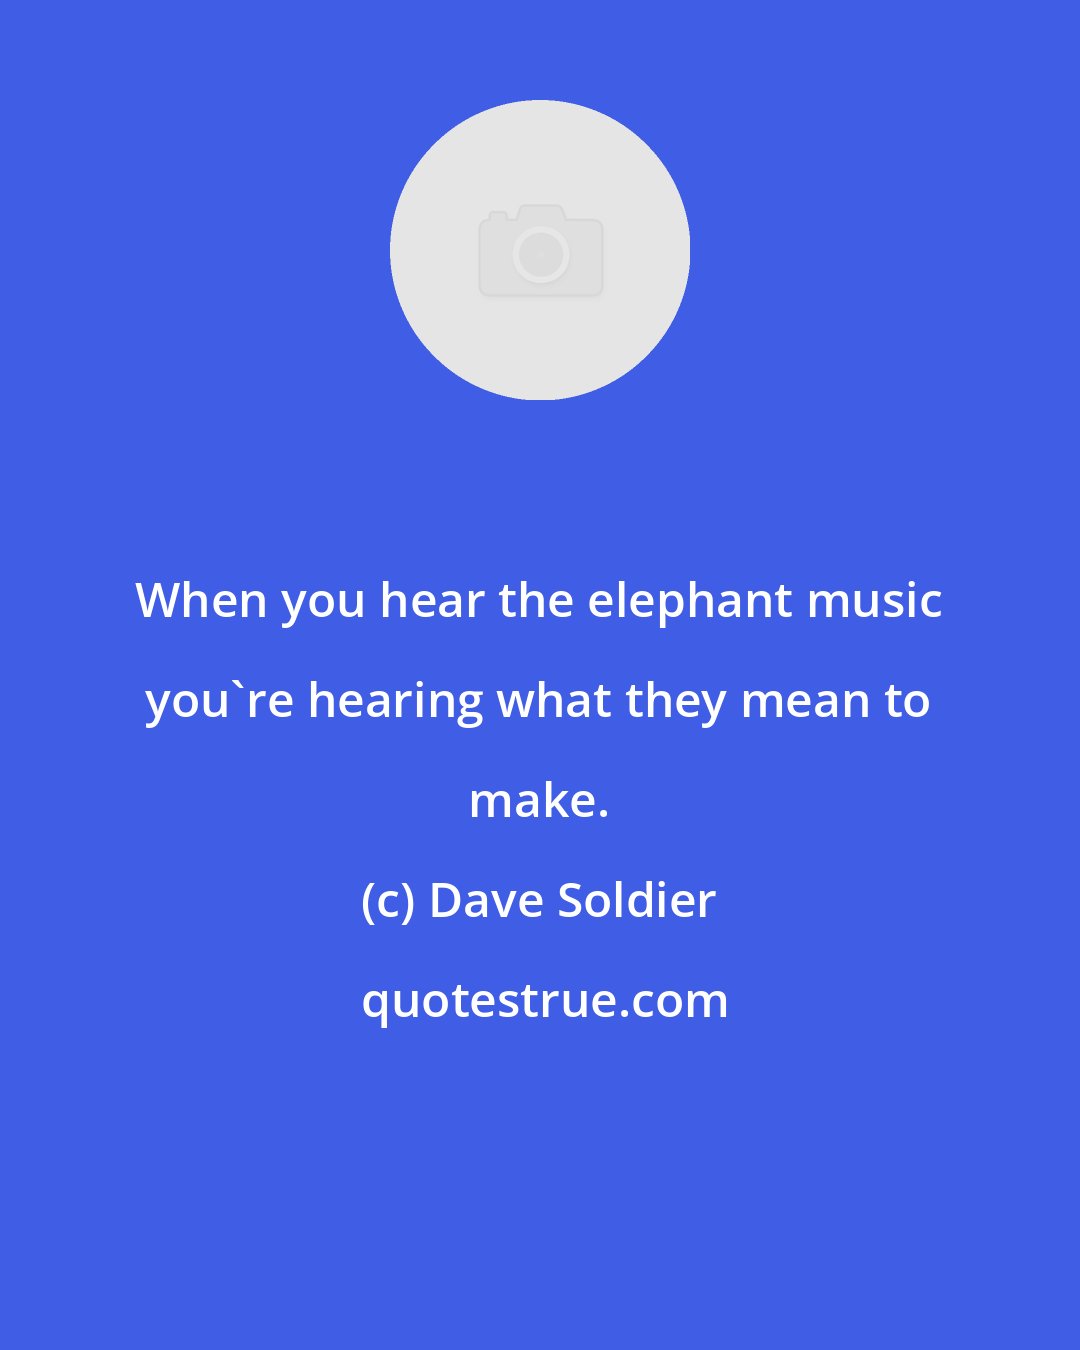 Dave Soldier: When you hear the elephant music you're hearing what they mean to make.